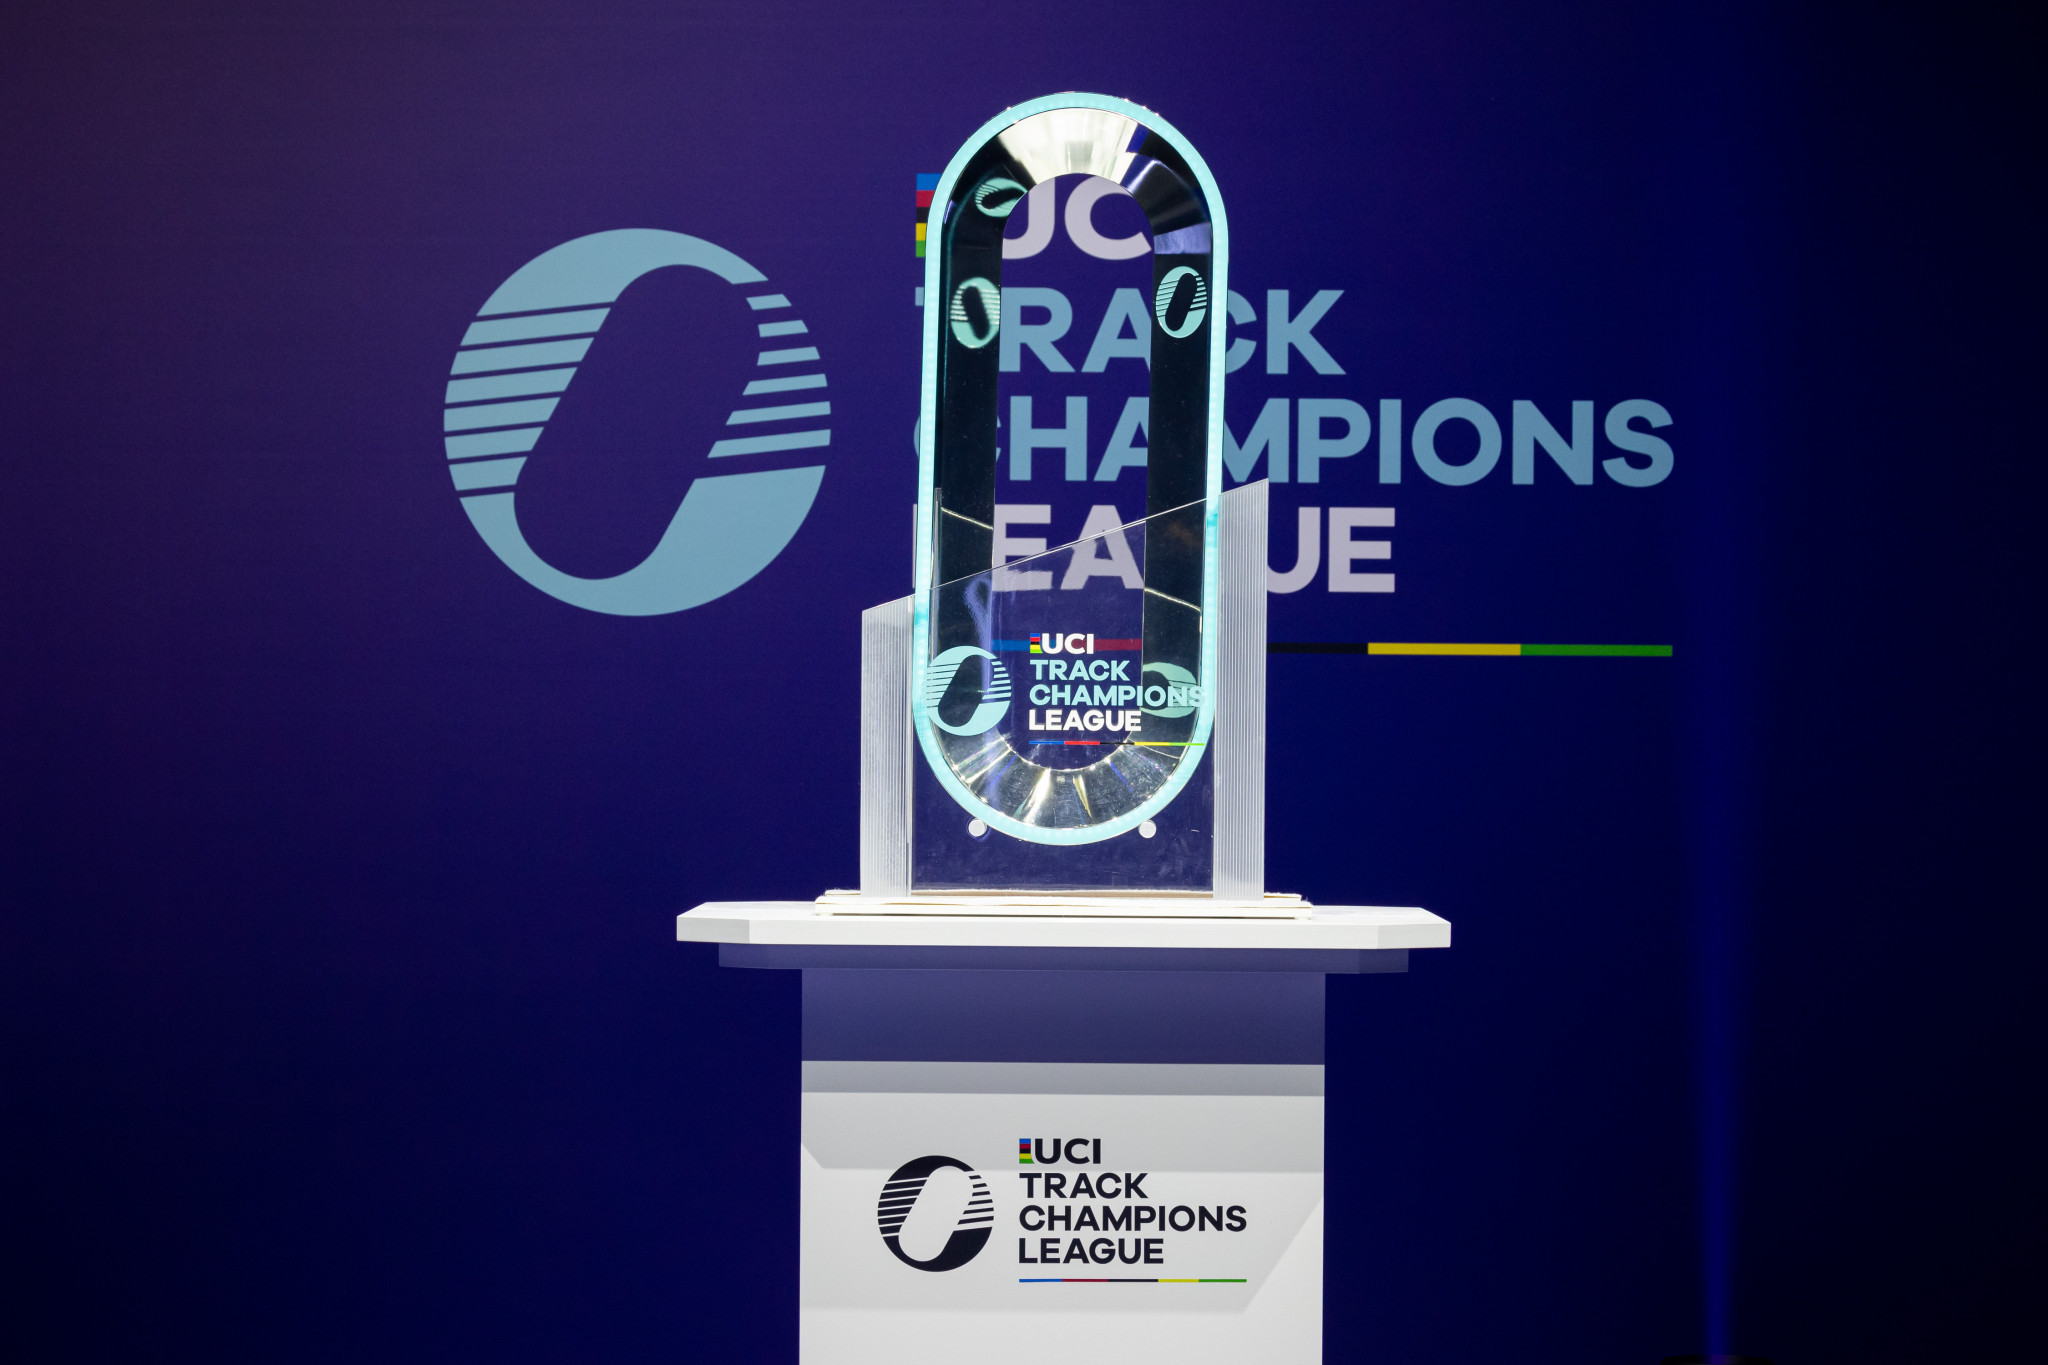 Mallorca to host opening event of inaugural UCI Track Champions League